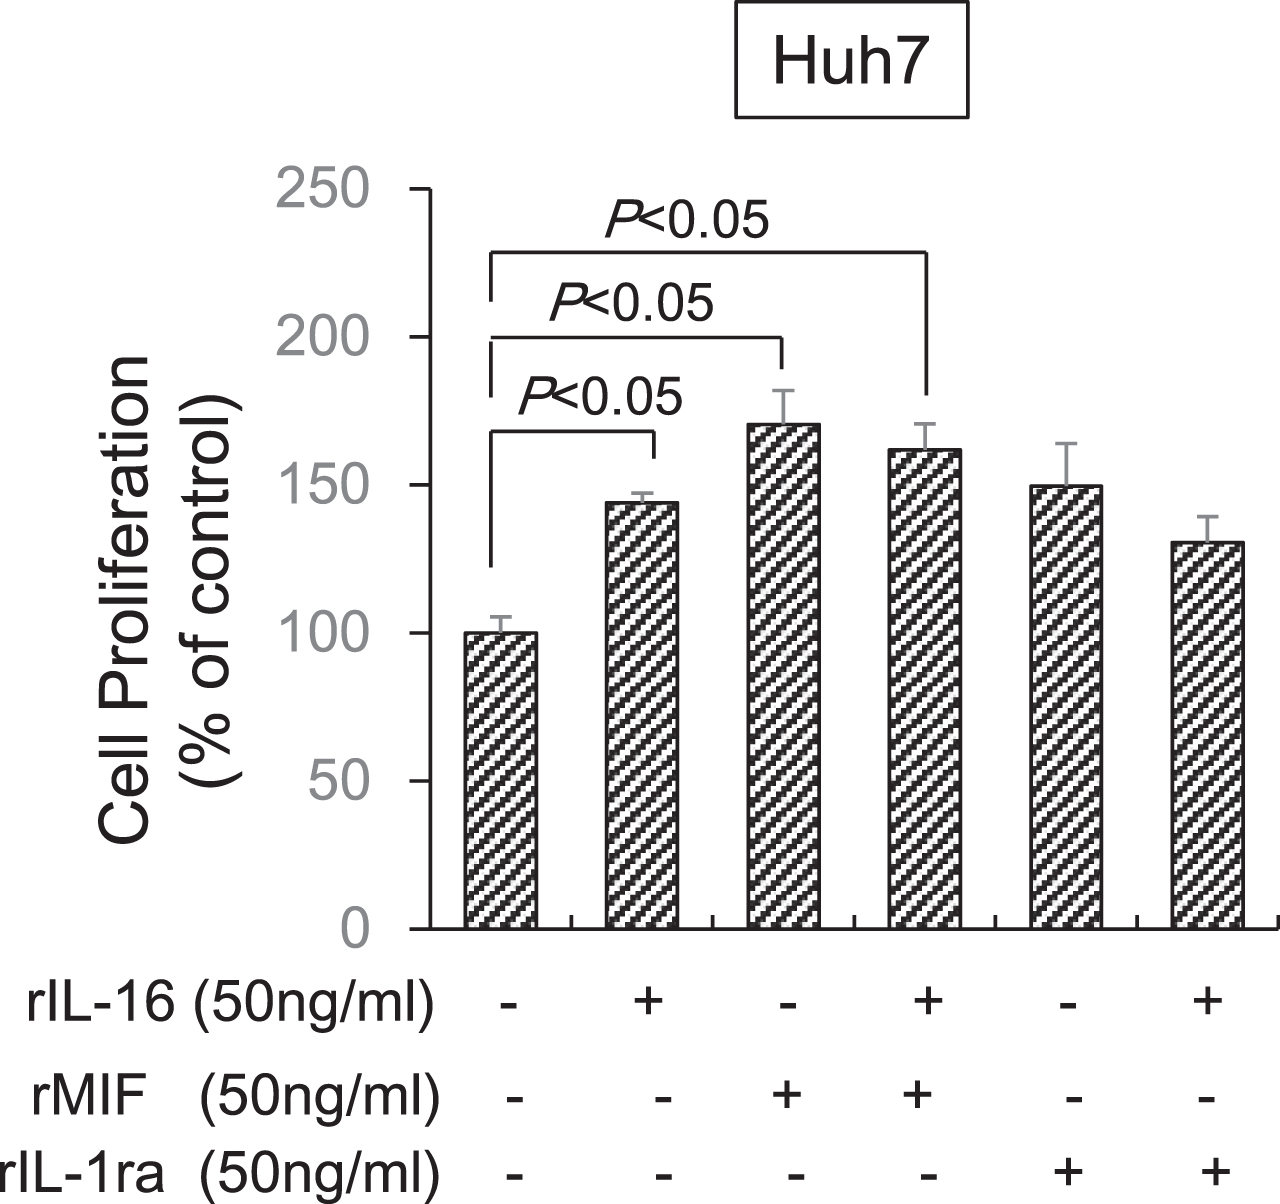 Synergistic effect of MIF and IL-1ra in combination with IL-16 on HCC cell proliferation. Huh7 cells (5×104) were incubated with IL-16 and MIF or IL-1ra at 50 ng/mL concentrations in 96-well plates for 72 h. Cell proliferation was detected using the MTS assay by measuring absorbance at 490 nm. Cell proliferation is presented as the ratio of the optical density of cells treated with MIF and IL-1ra in combination with IL-16 to that of untreated cells. Data indicate the mean±SEM. Data are representative of eight (MIF treatment, right panel) and six (IL-1ra treatment, left panel) independent experiments, respectively. P < 0.05 versus untreated cells.